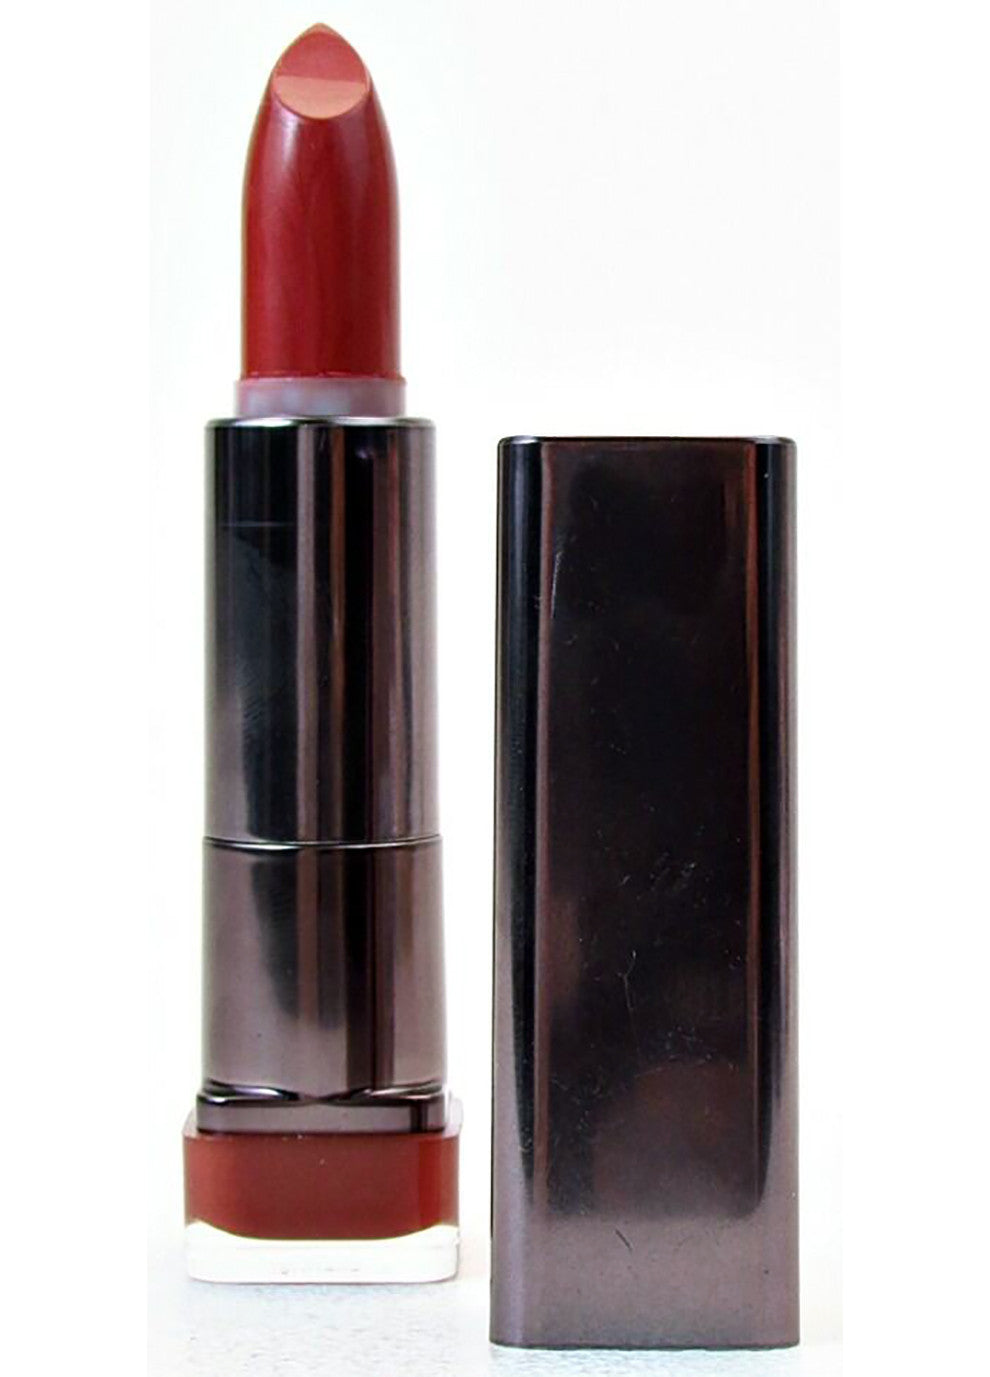 Covergirl Lip Perfection Lipstick #225 Enthrall